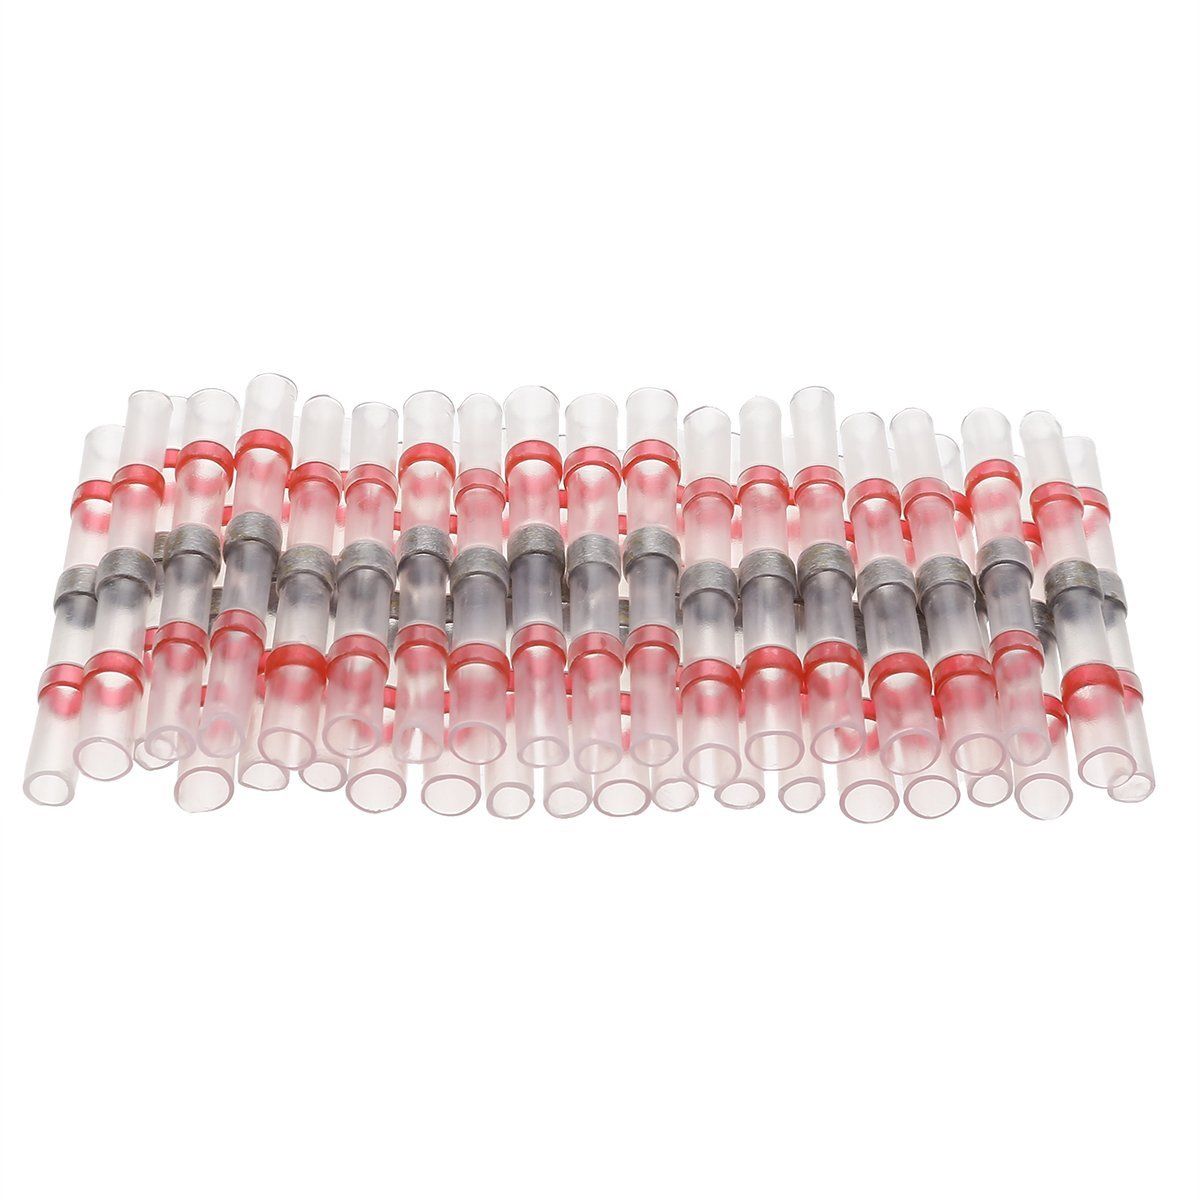 25/50PCS Heat Shrink Soldering Sleeve Terminals Insulated Waterproof Butt Wire Connectors Electrical Wire Soldered Terminals